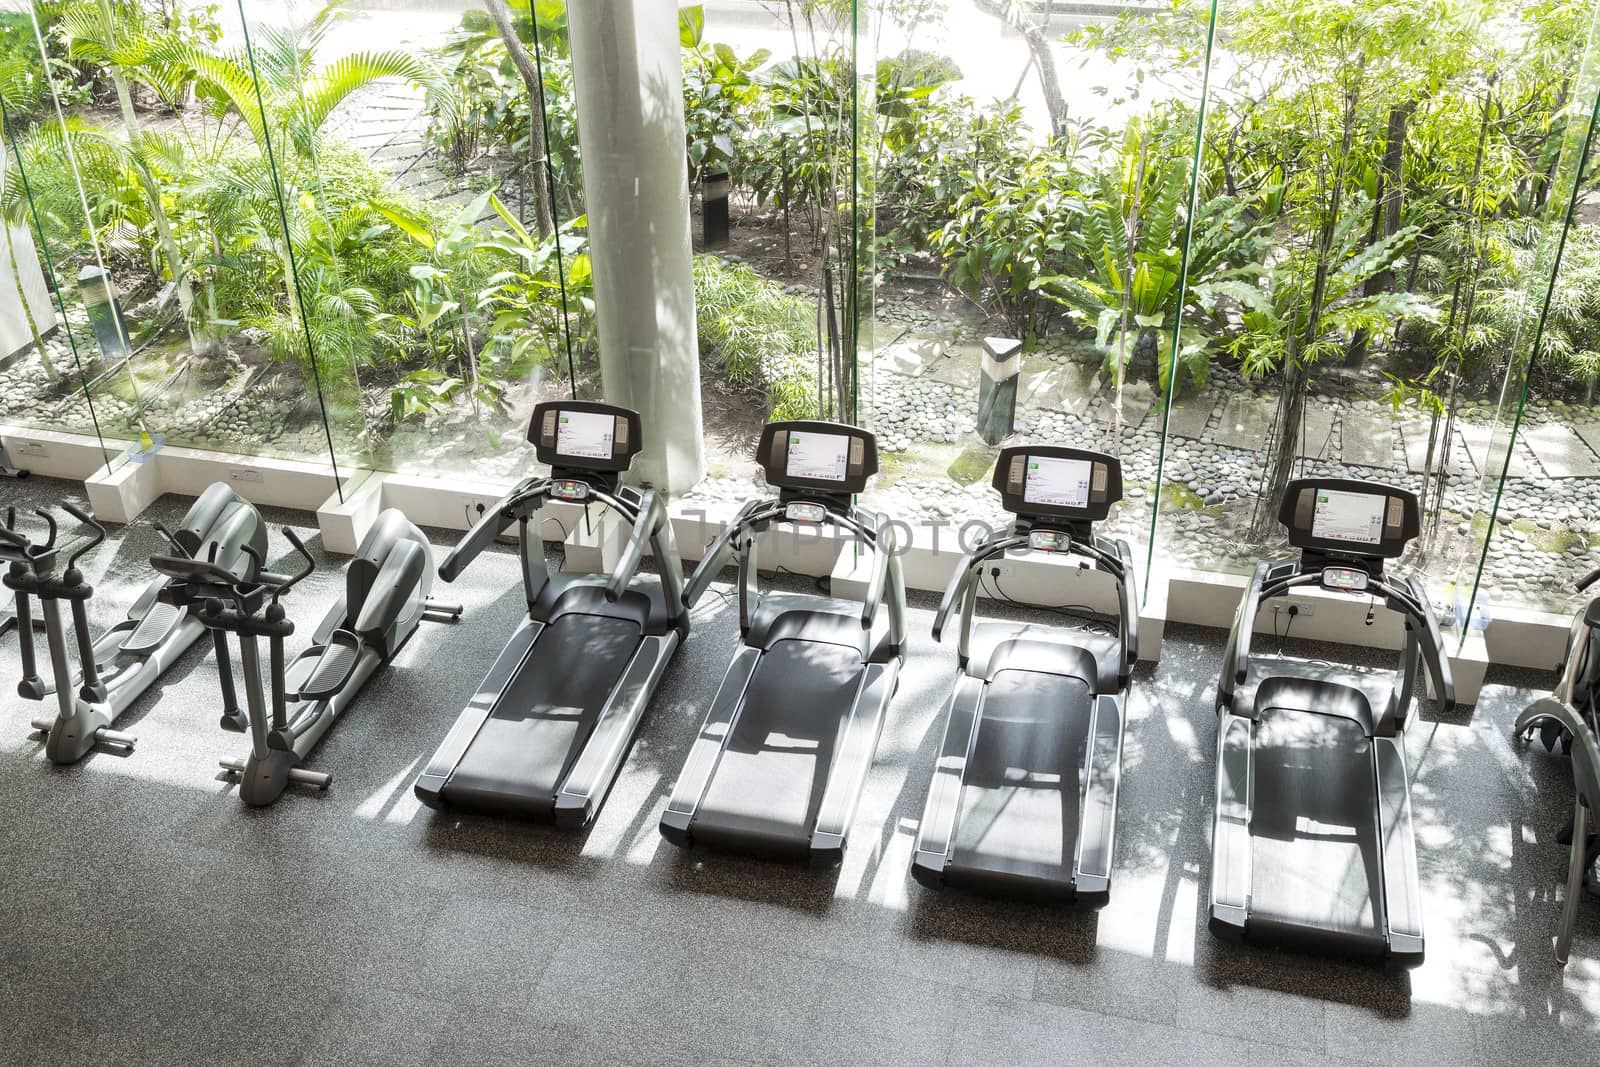 Interior of a club gym with a greenery infront.